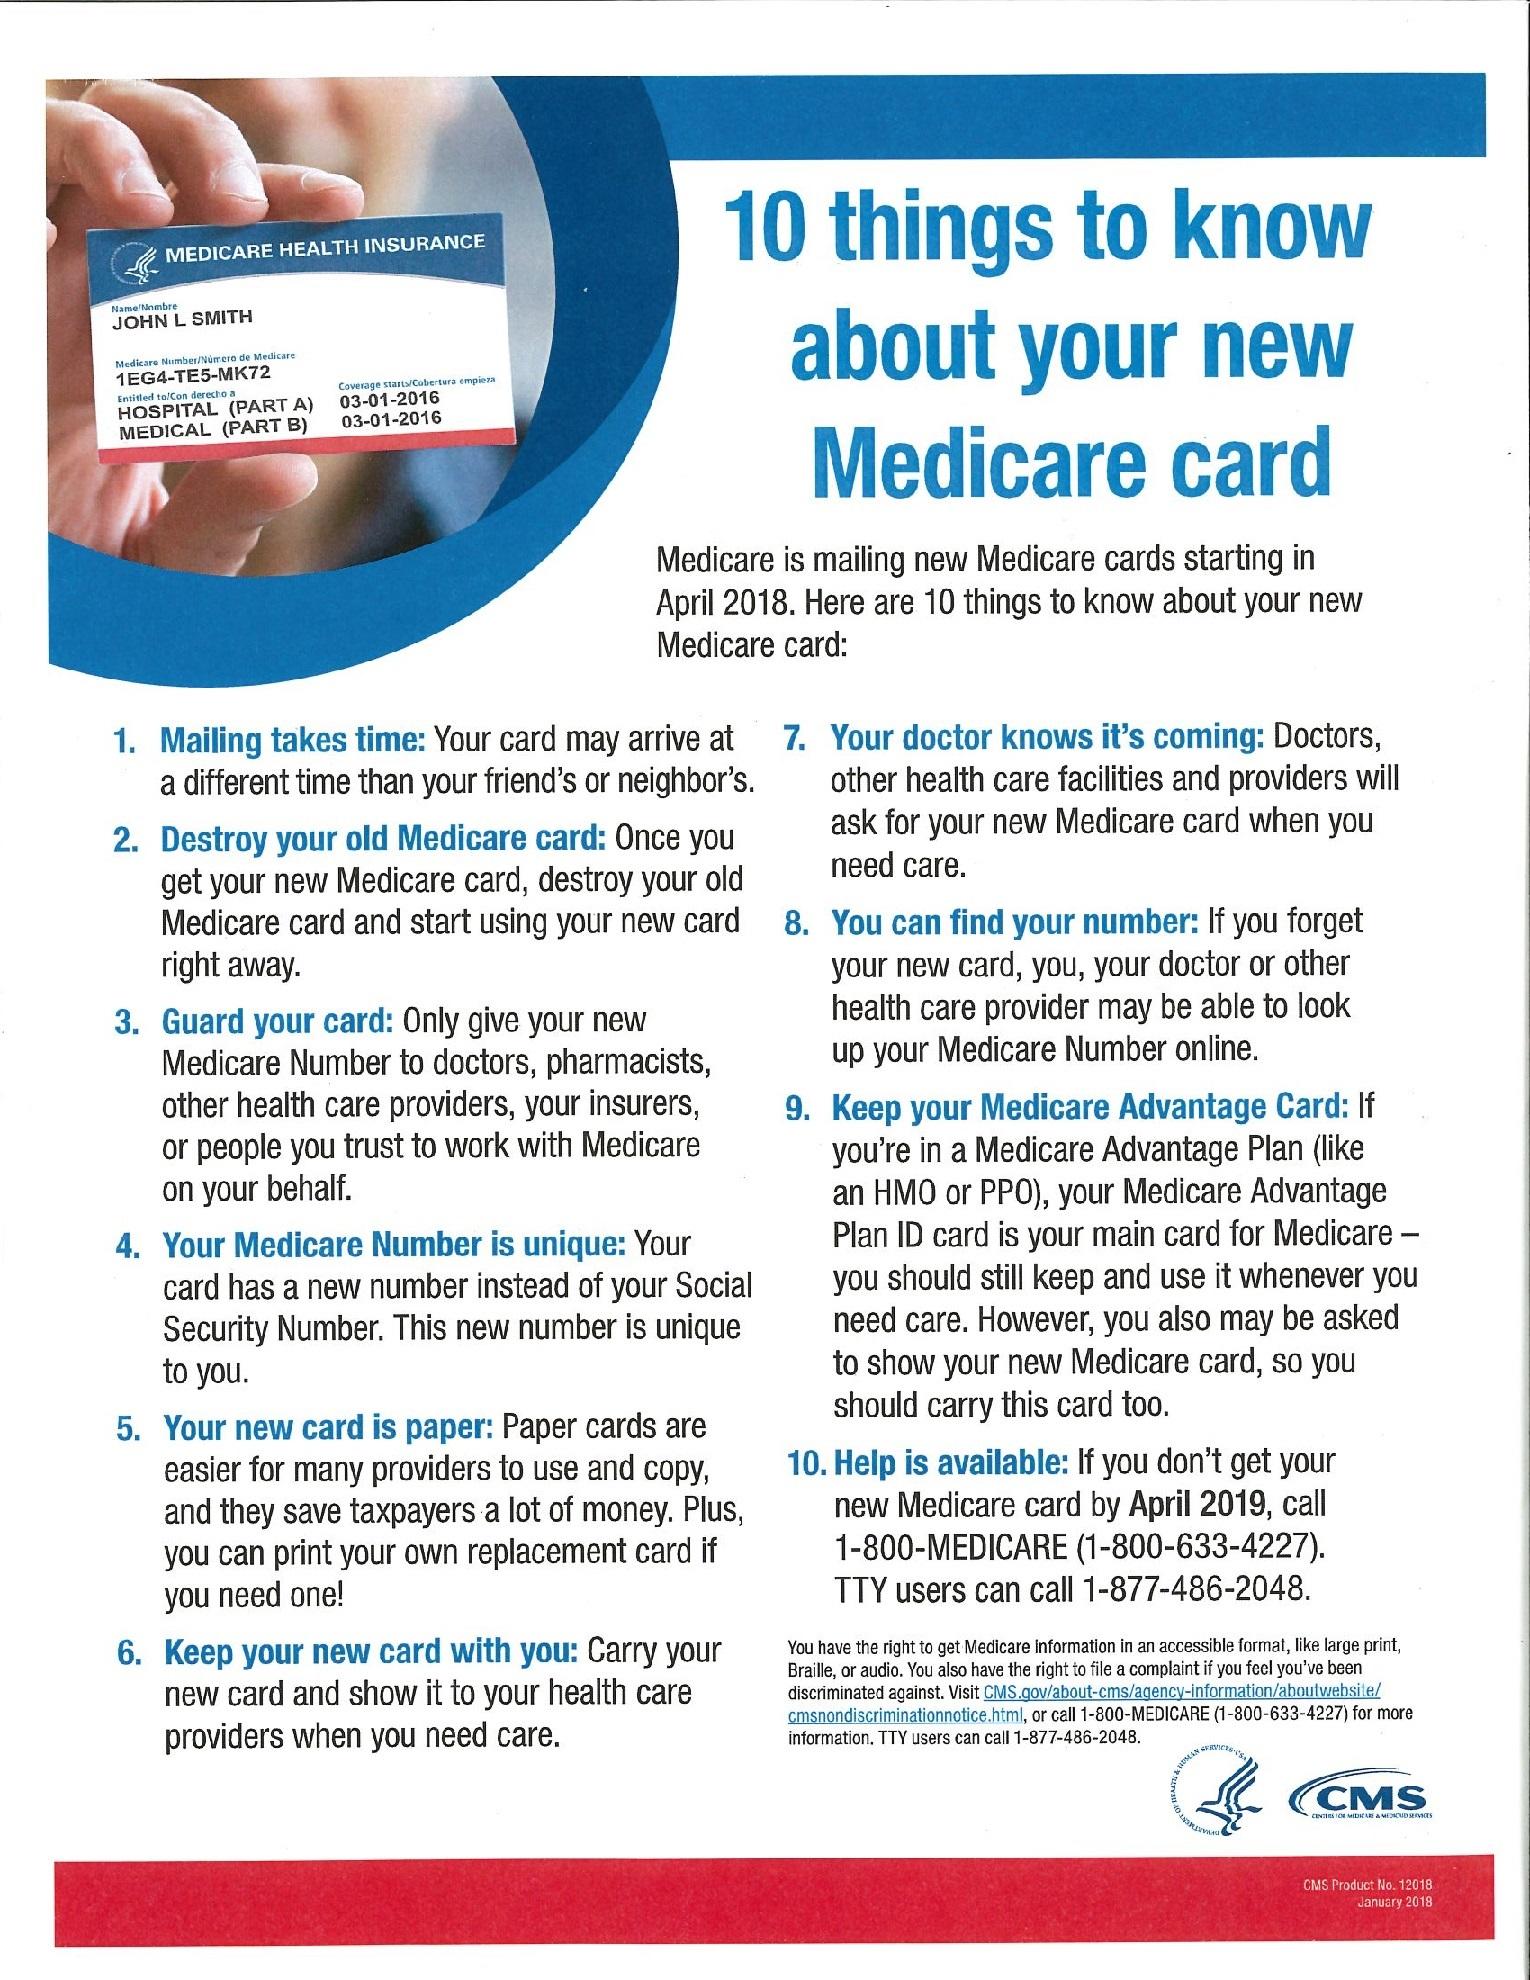 Your new Medicare card